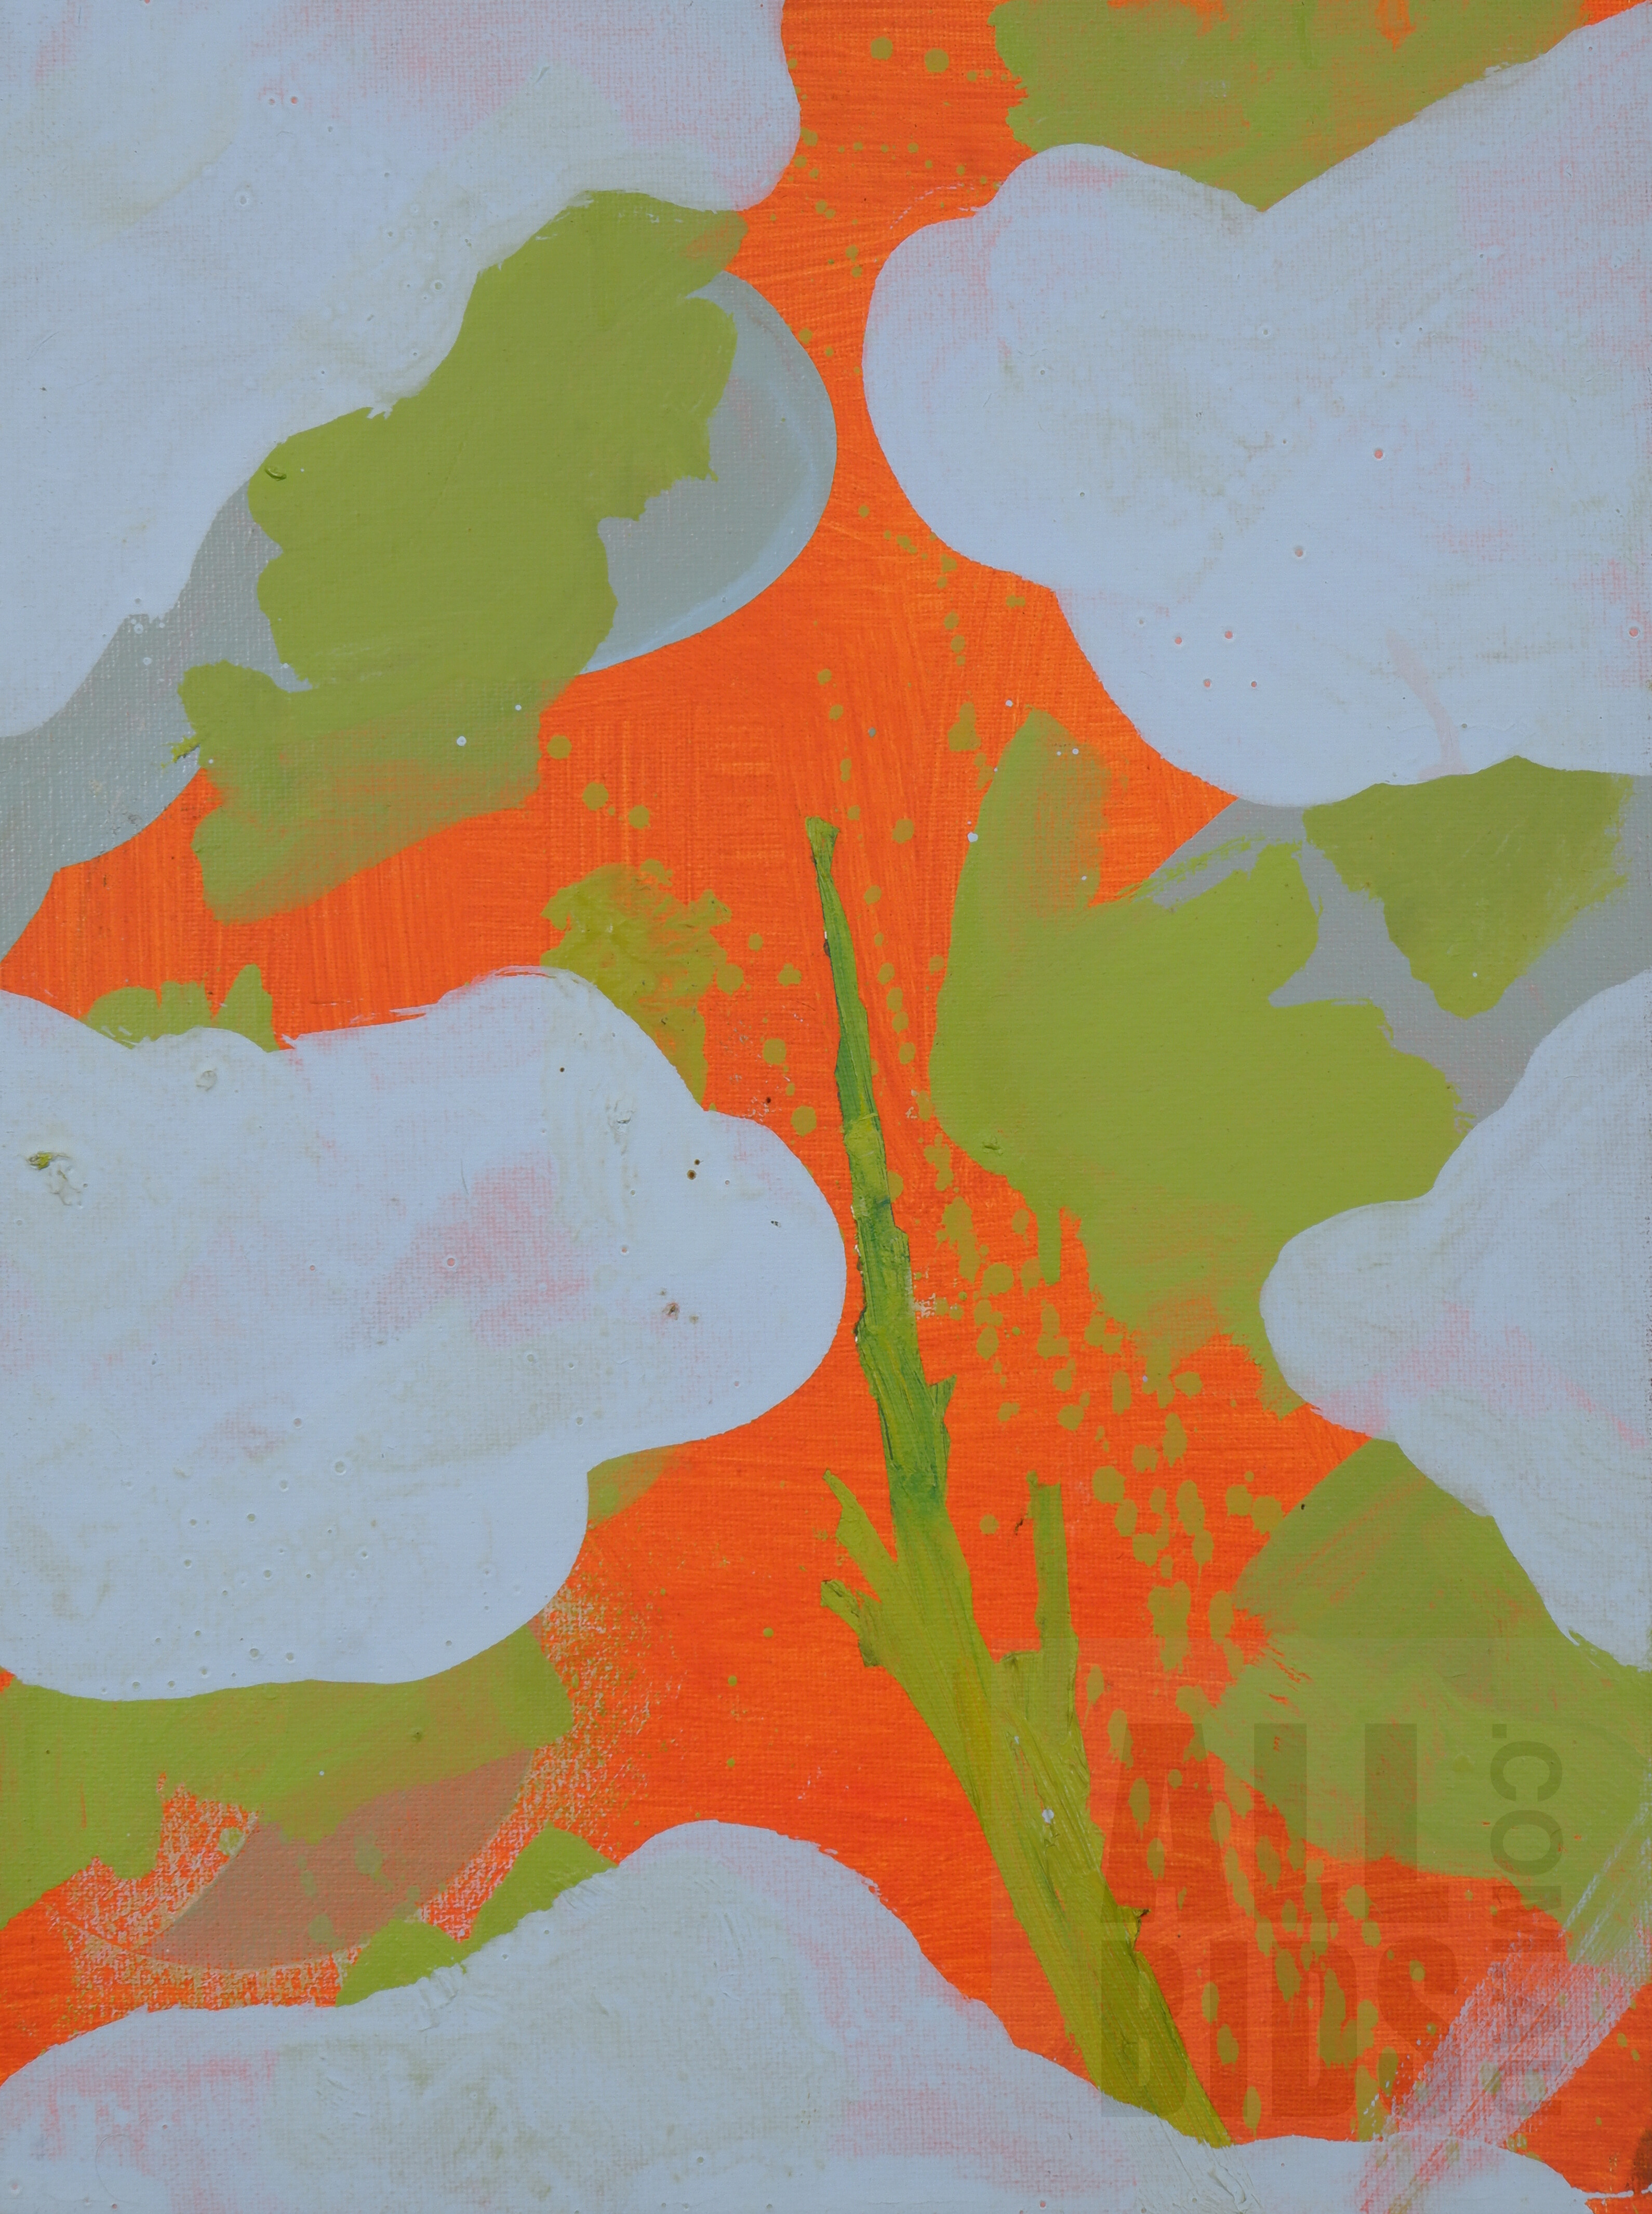 'Henry Mulholland (born 1962), Orange and Blue Clouds 2006, Oil on Canvas, 40 x 20 cm'